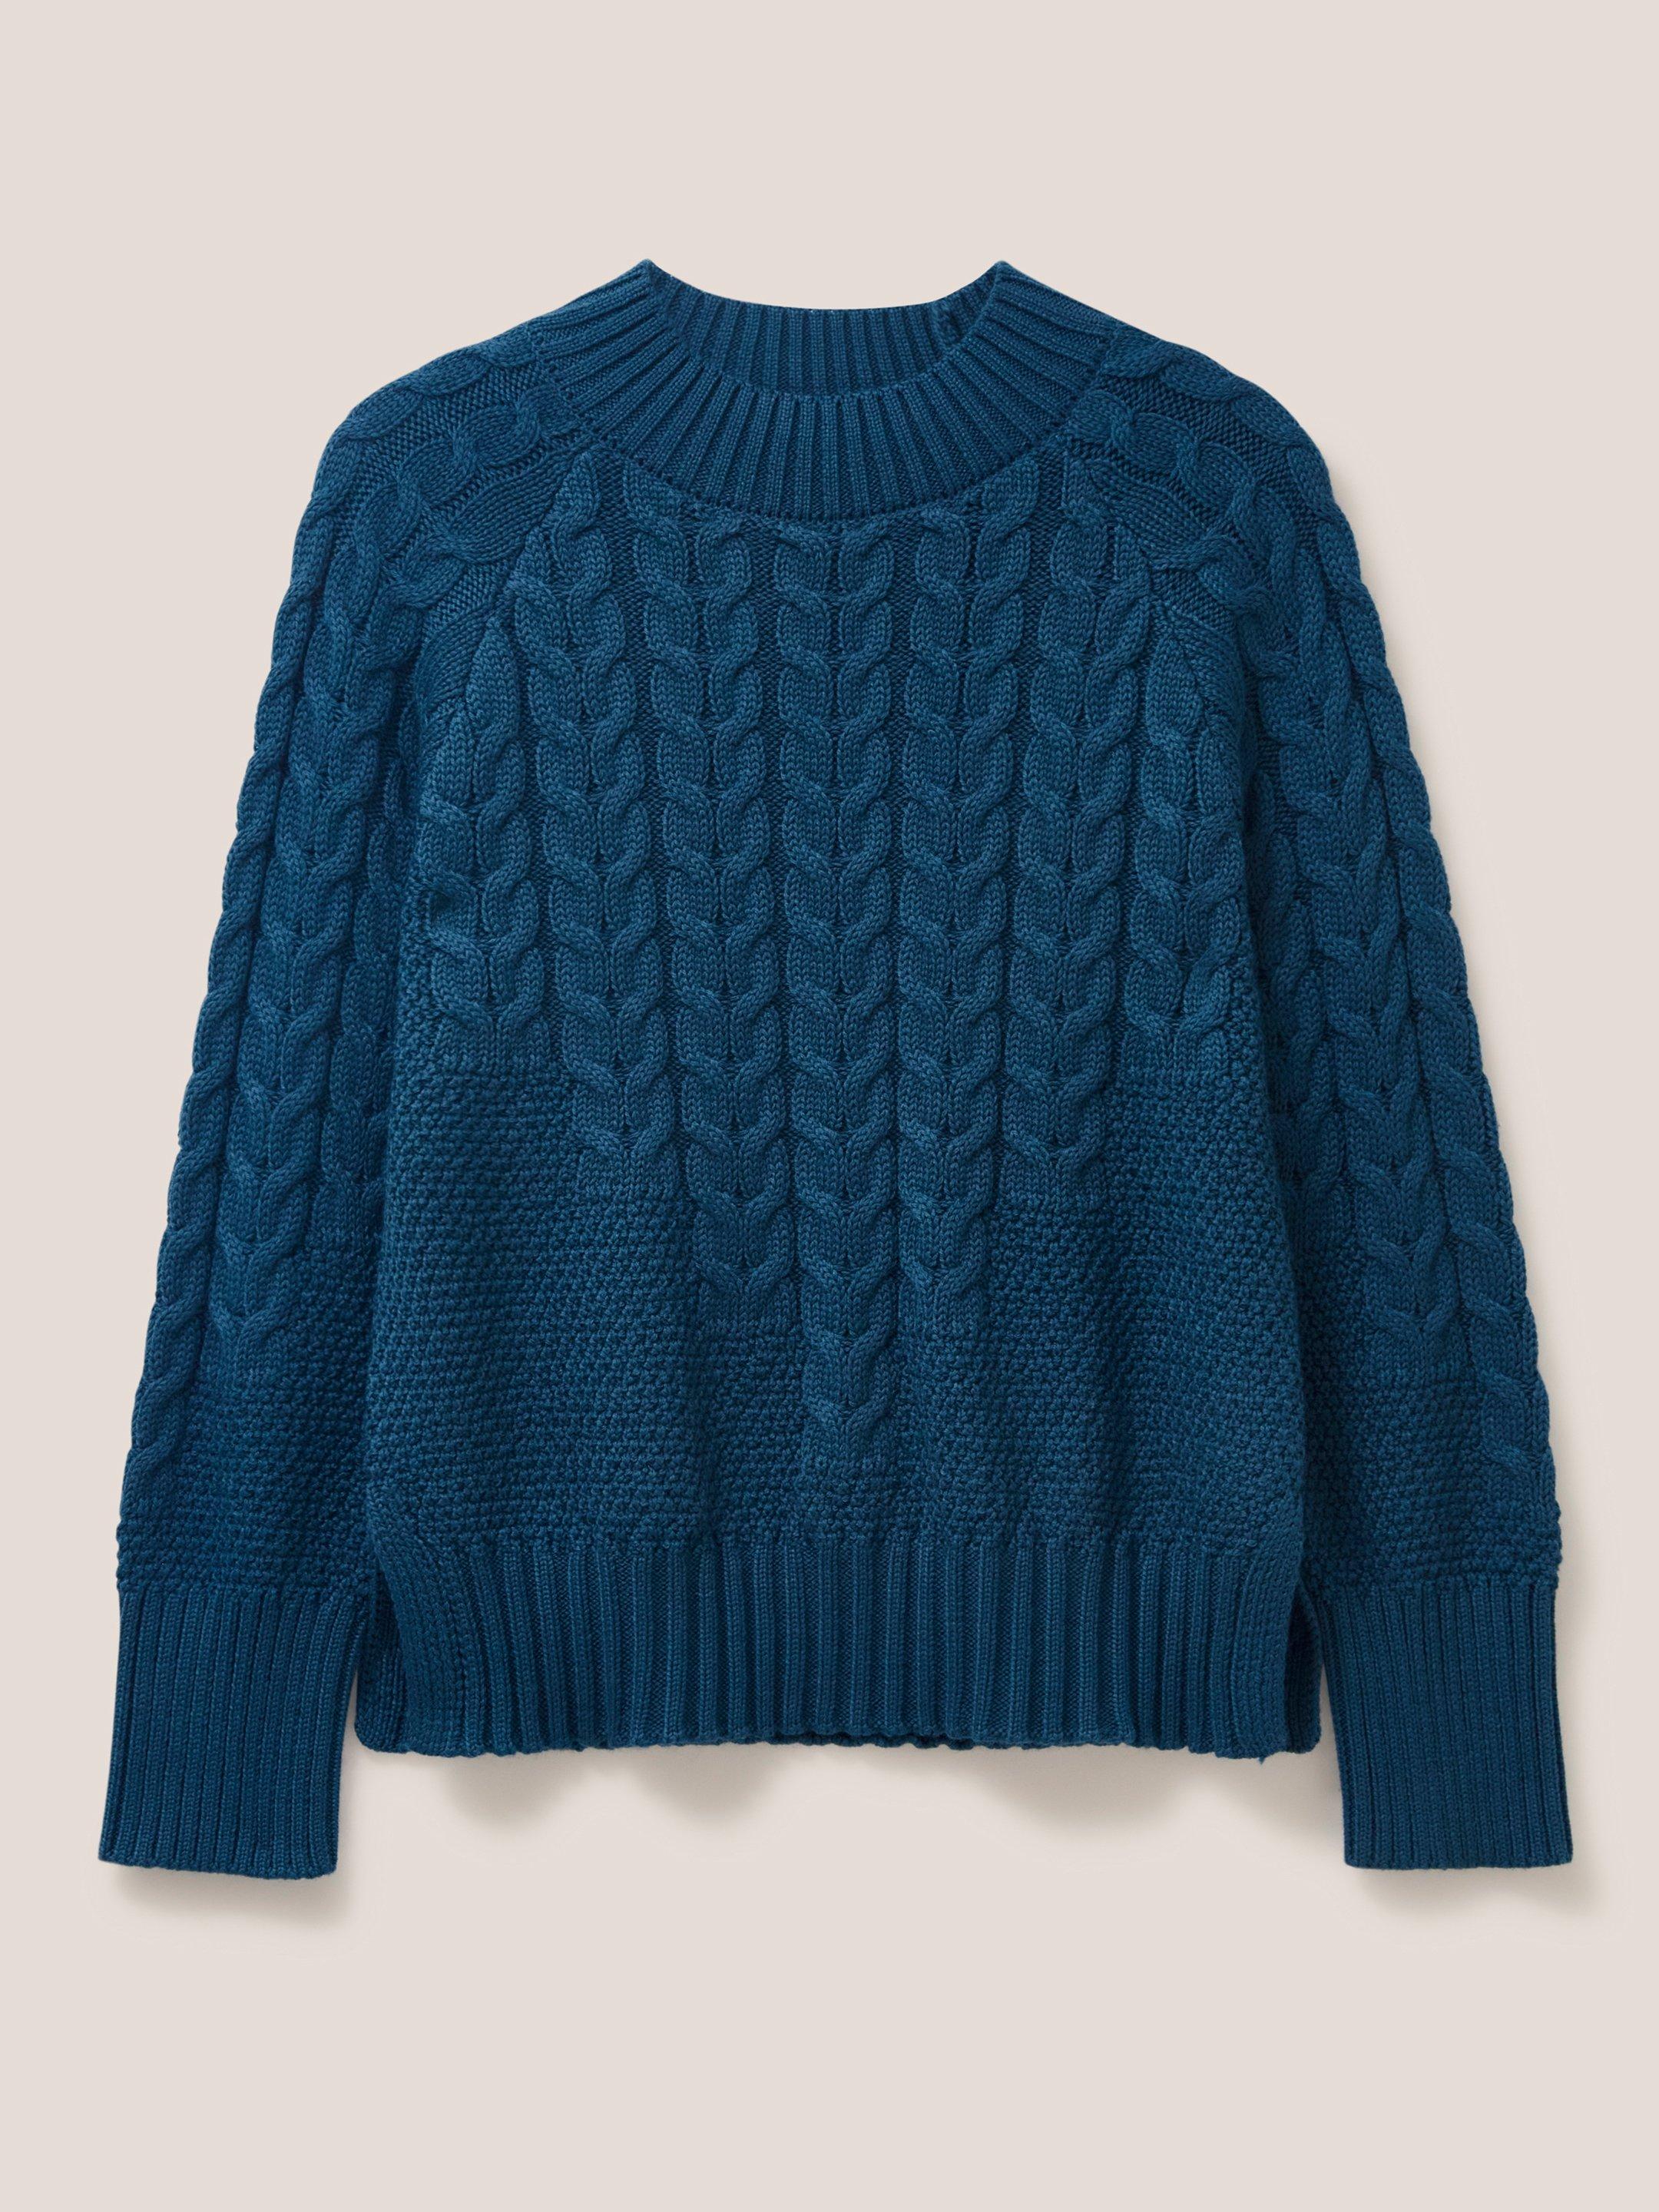 CABLE YOKE JUMPER in MID BLUE - FLAT FRONT